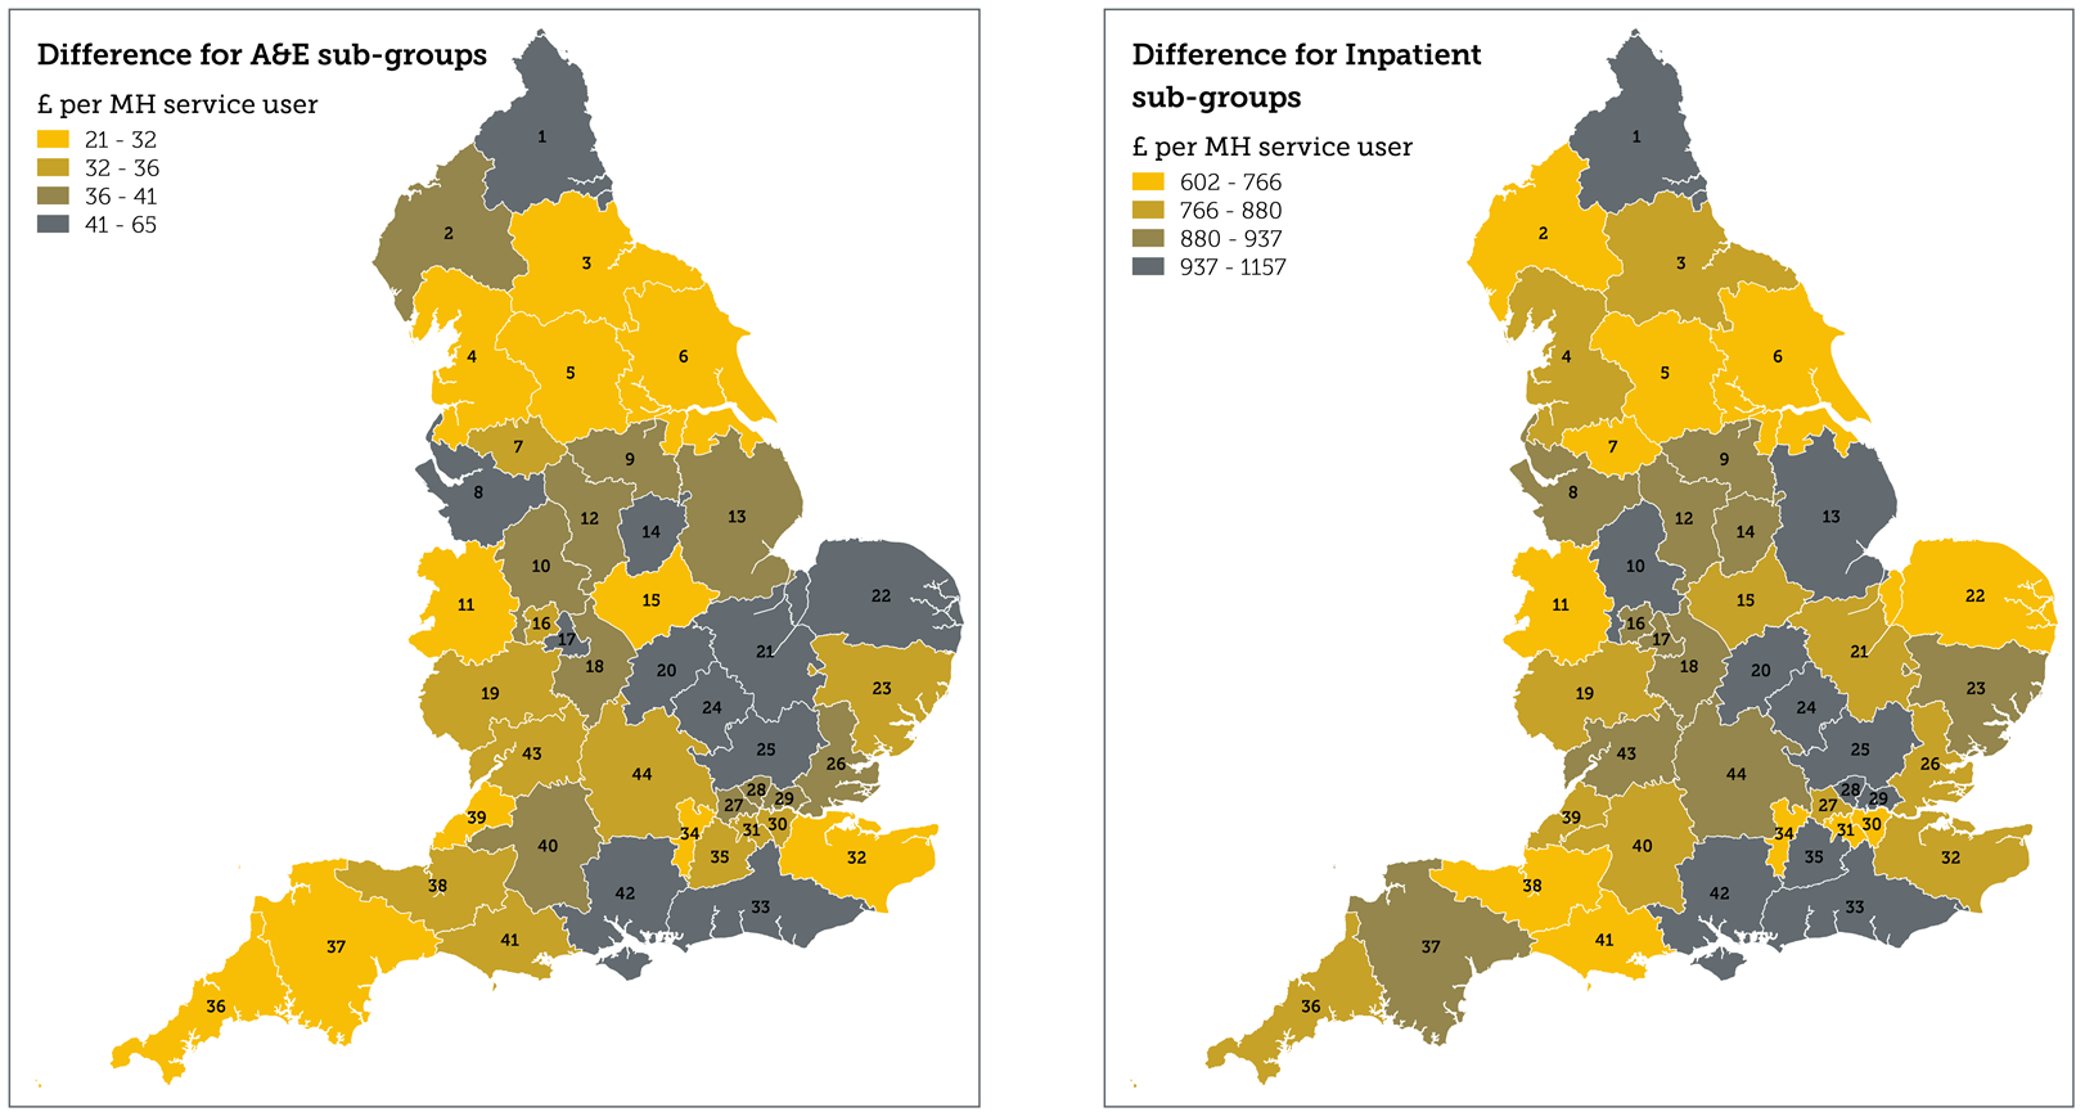 Fig 3. Difference in A&E and inpatient spend per head of service user population by STP area